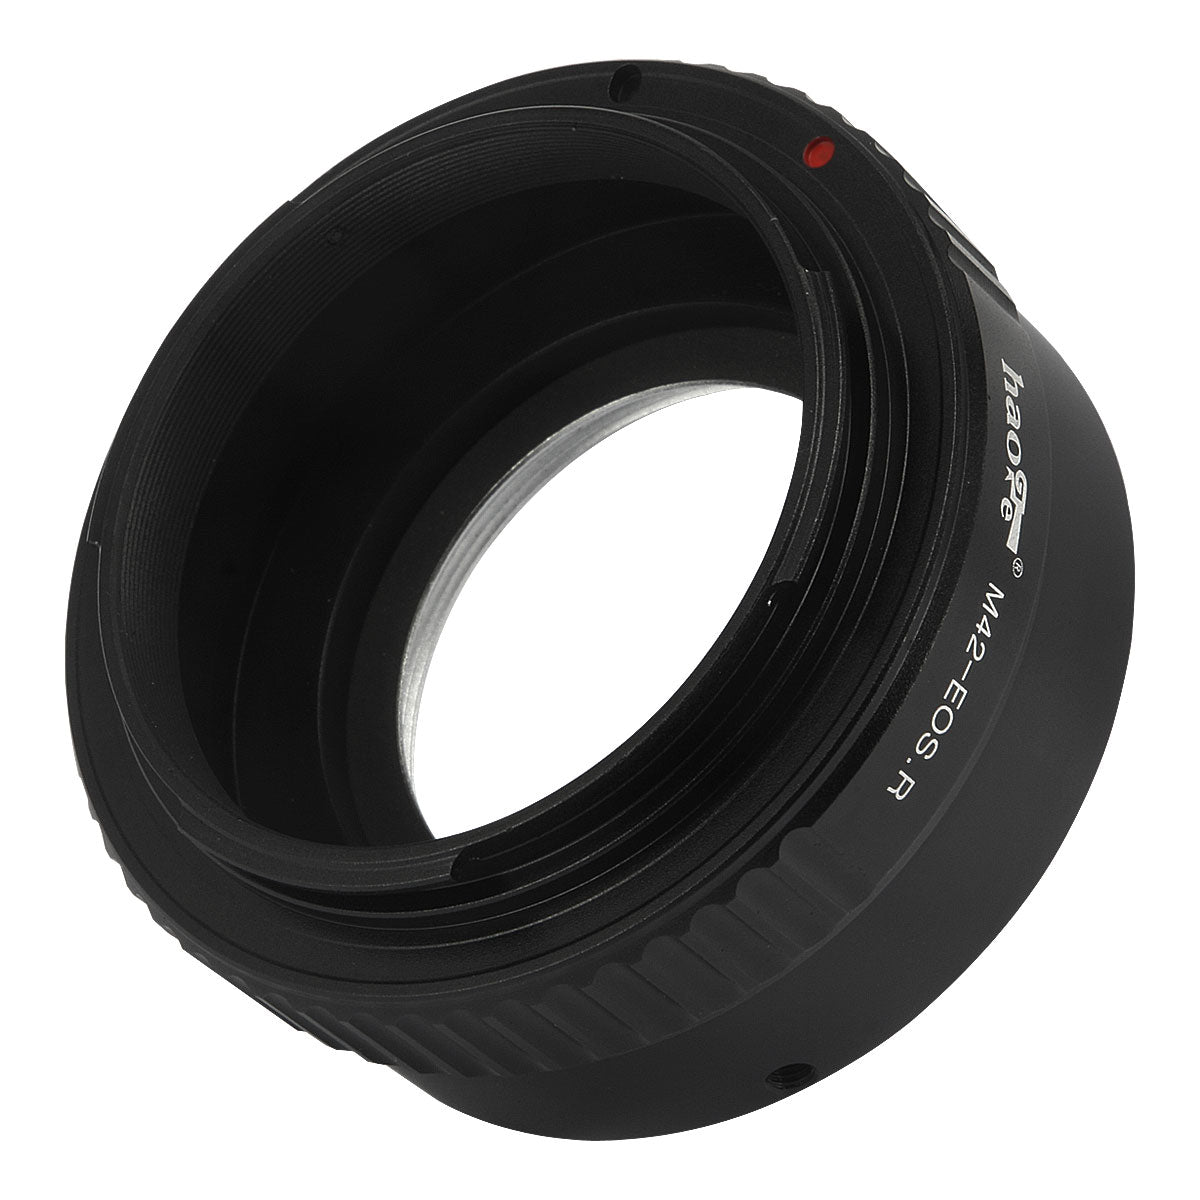 Haoge Manual Lens Mount Adapter for M42 42mm Screw mount Lens to Canon RF Mount Camera Such as Canon EOS R